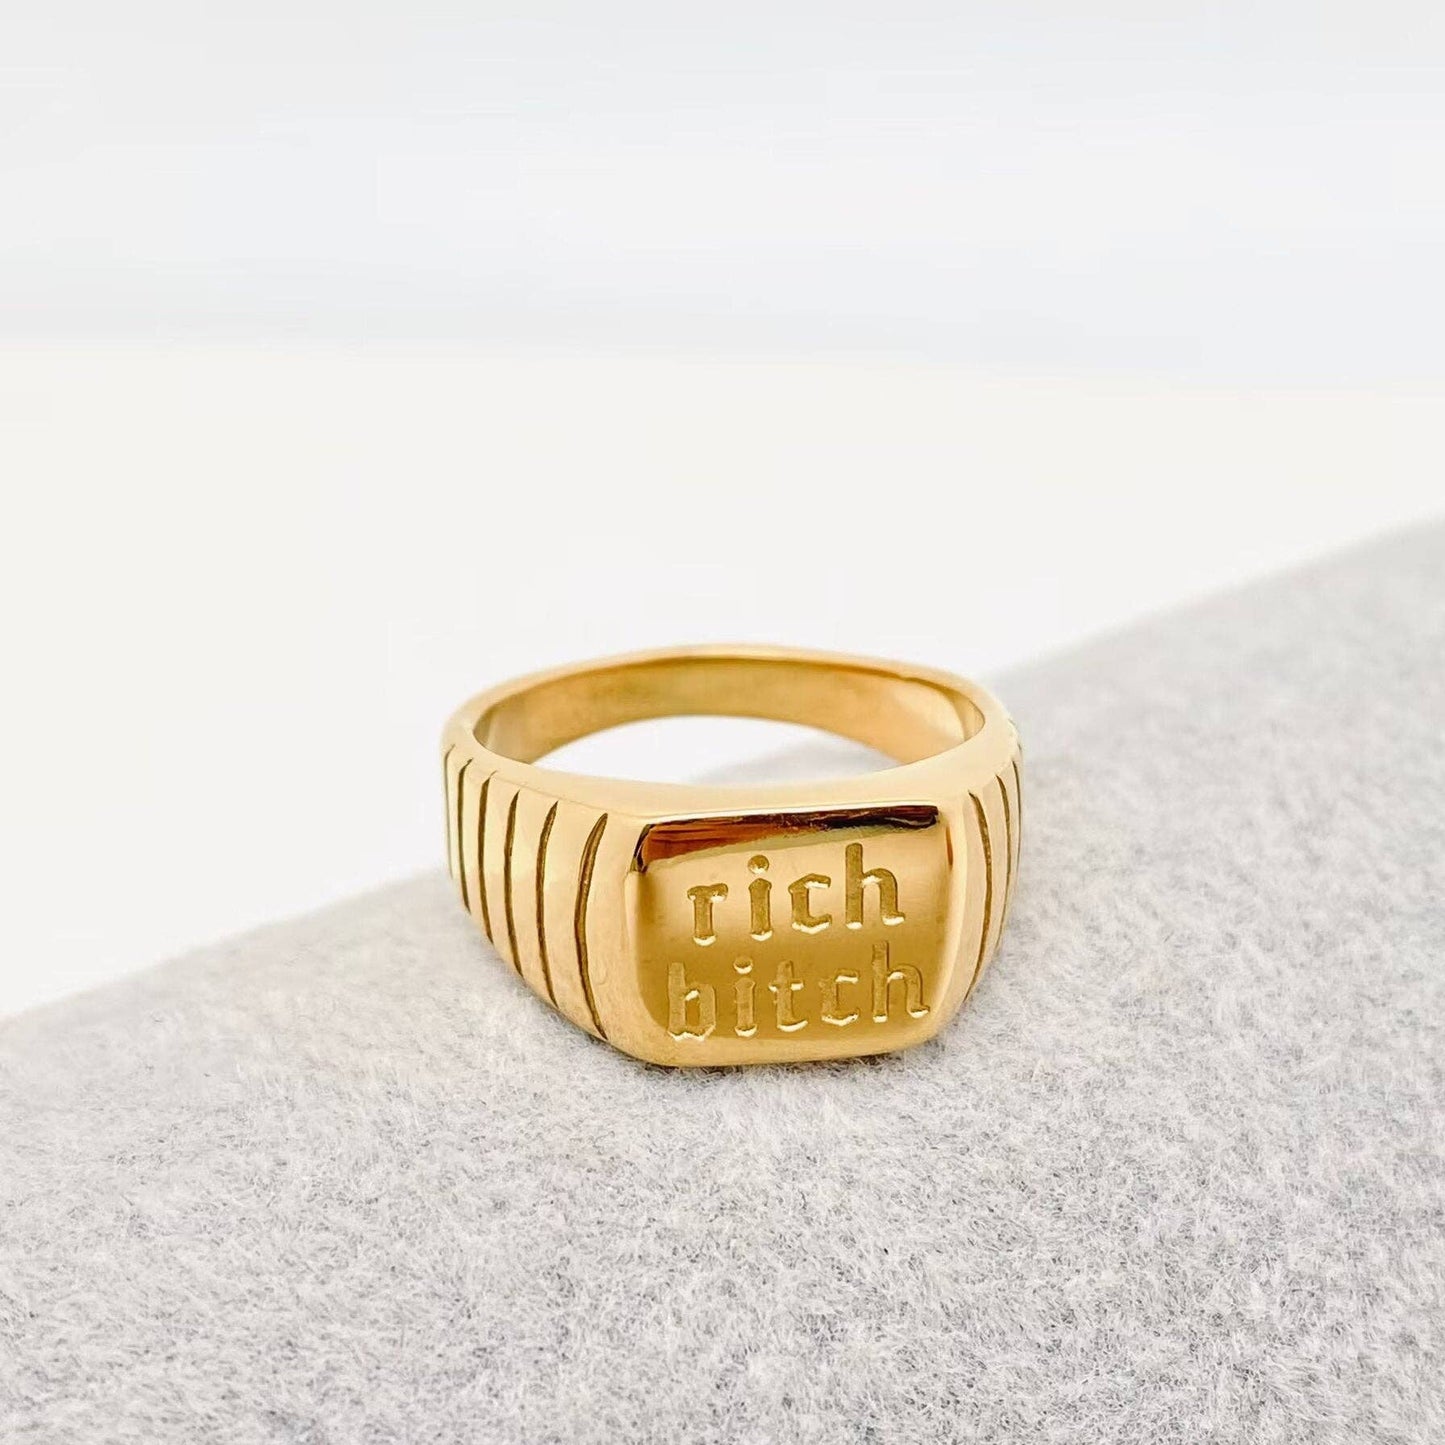 "Rich Bitch" 18K Gold Plated Stainless Steel Ring  ✨ Abundance ✨